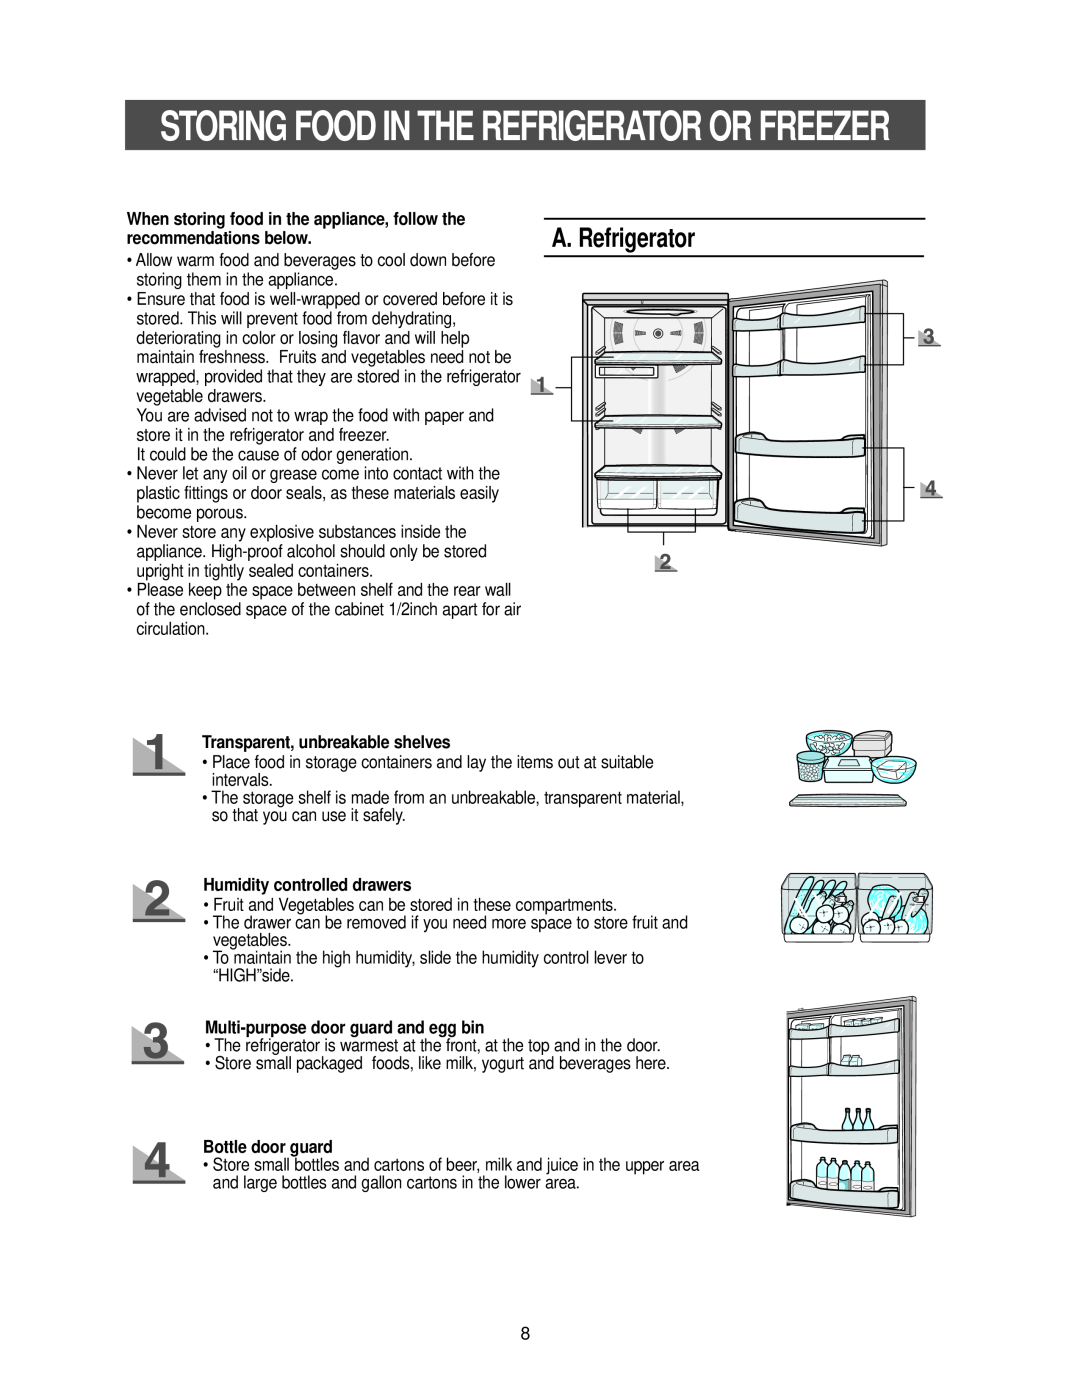 Samsung RB2155SW A. Refrigerator, When storing food in the appliance, follow the recommendations below, Bottle door guard 